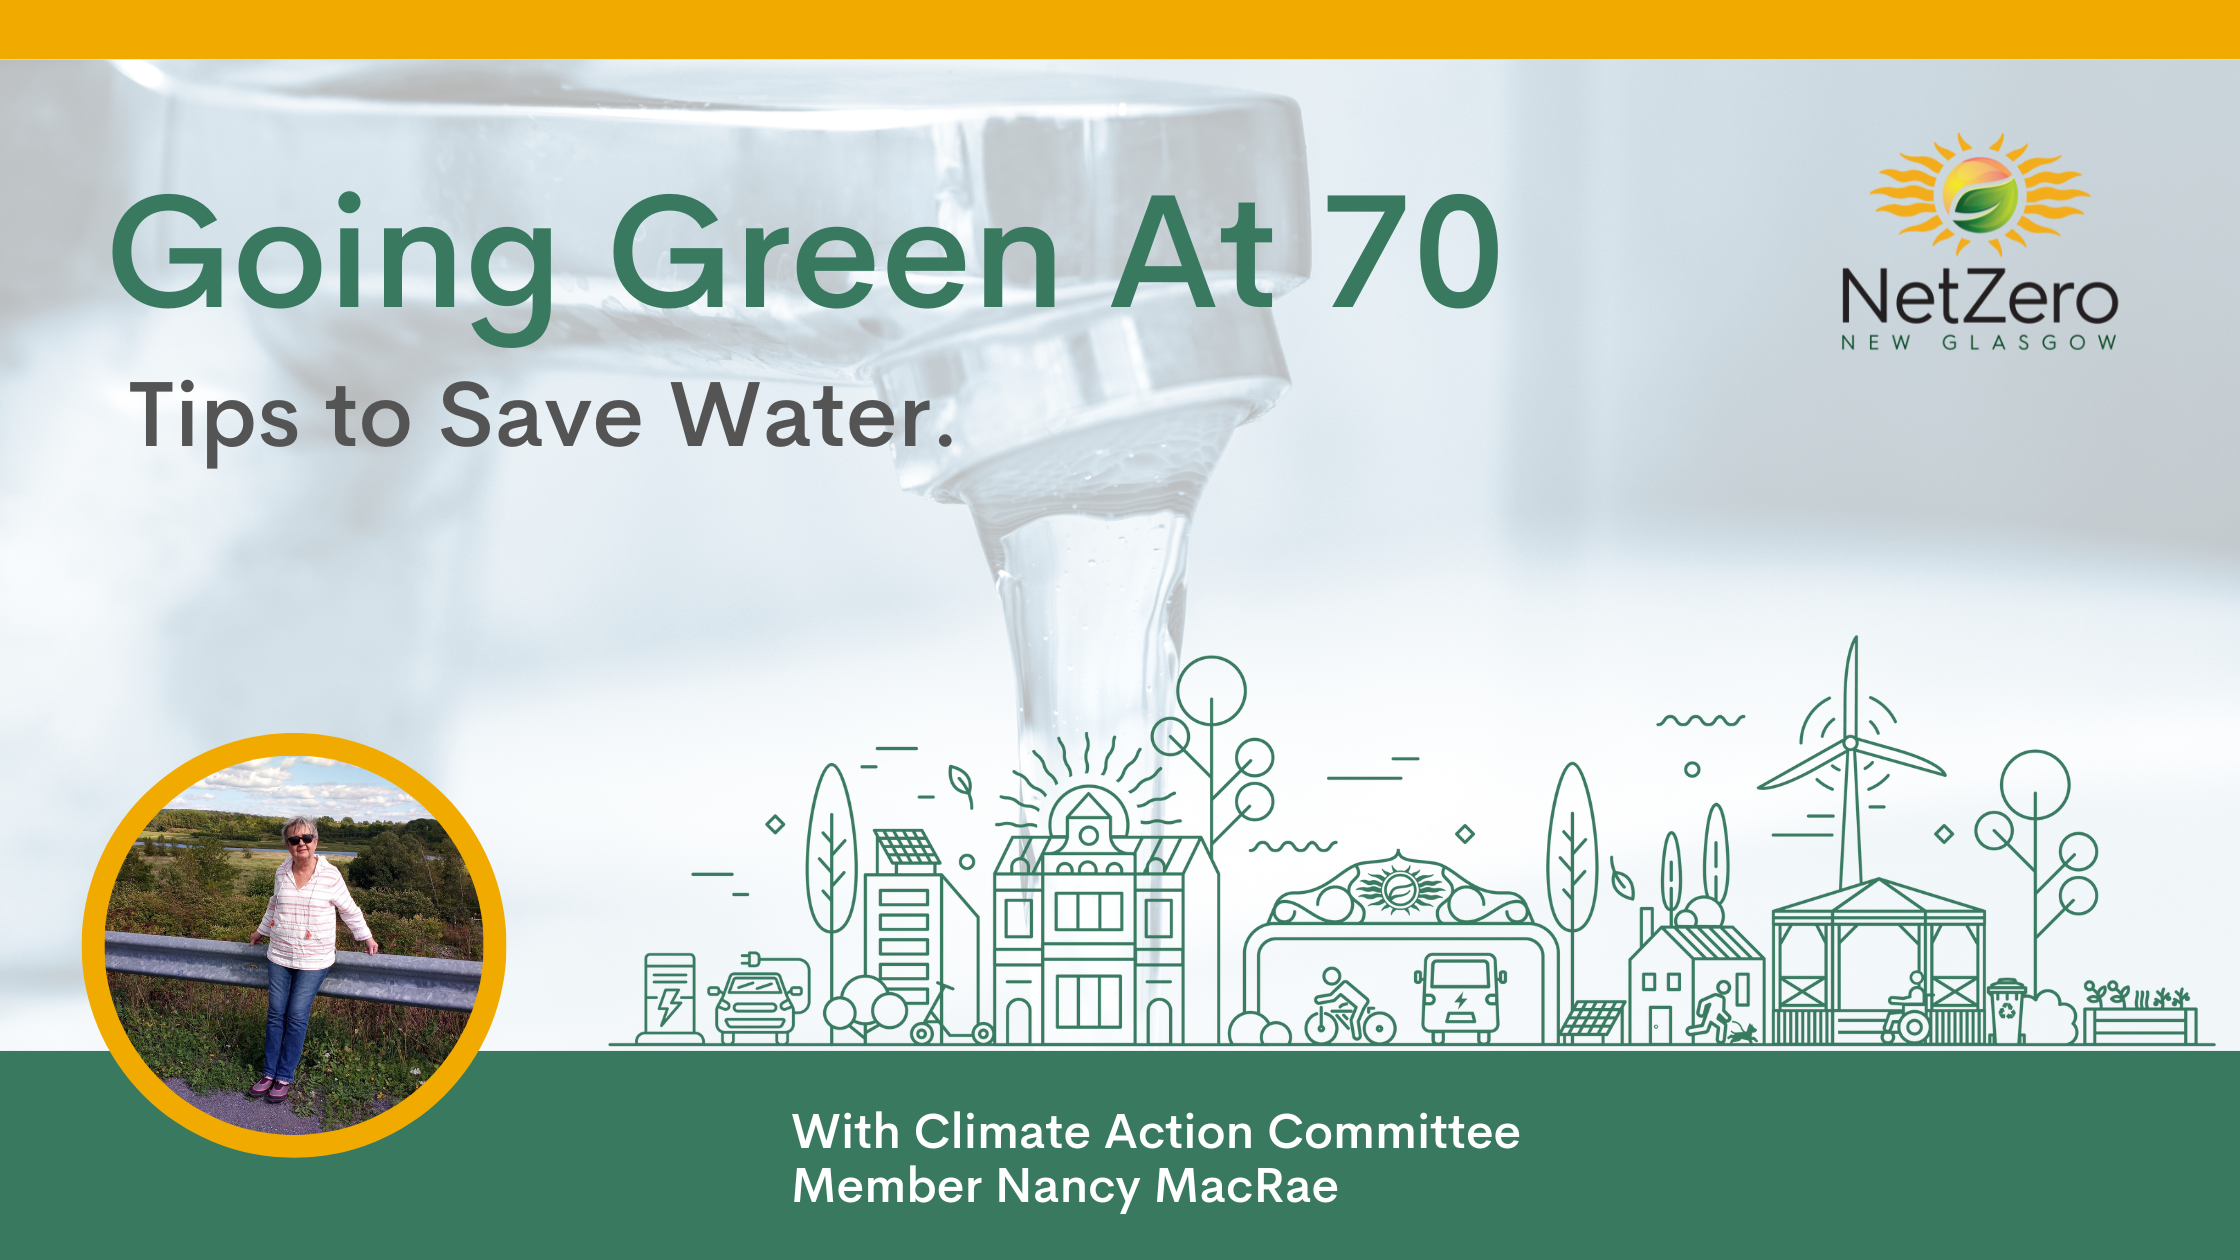 Going Green at 70 Blog Posts tips to save water